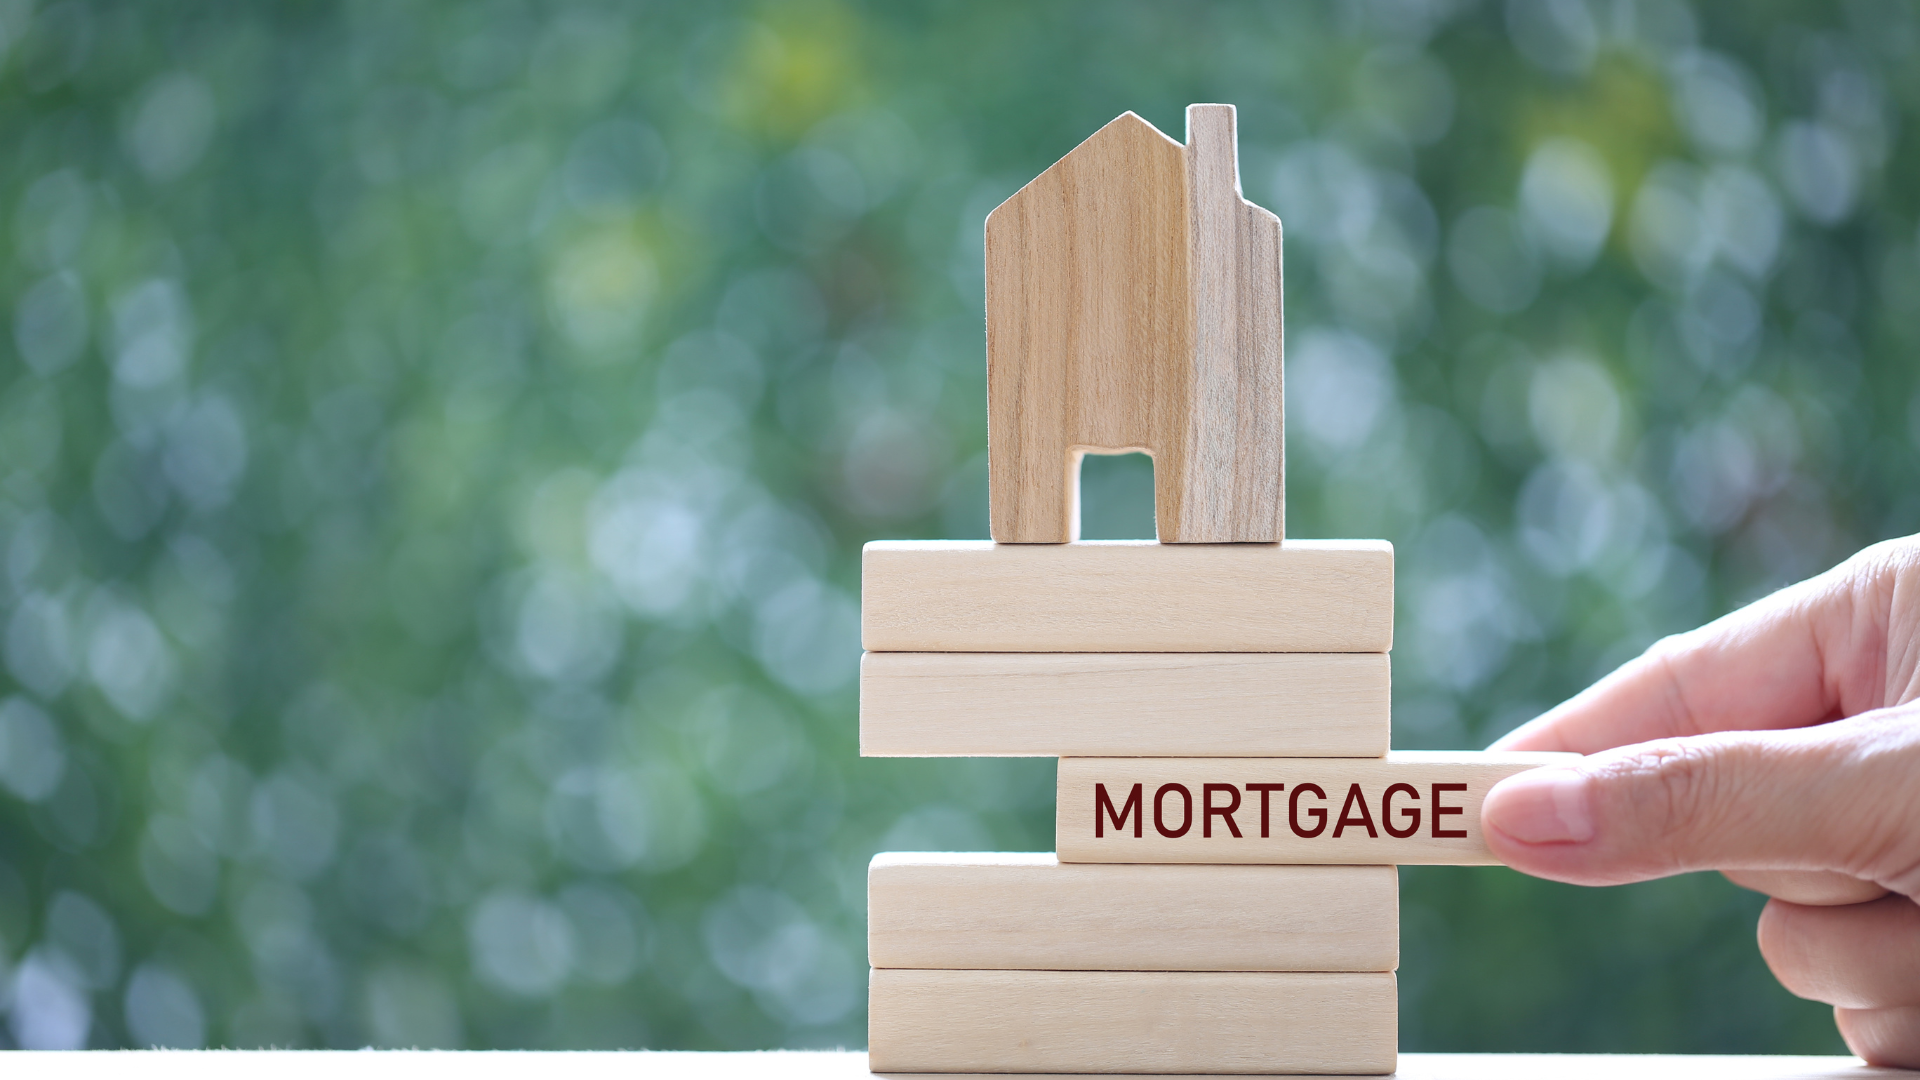 investment property financing takes the guidance of a professional mortgage broker